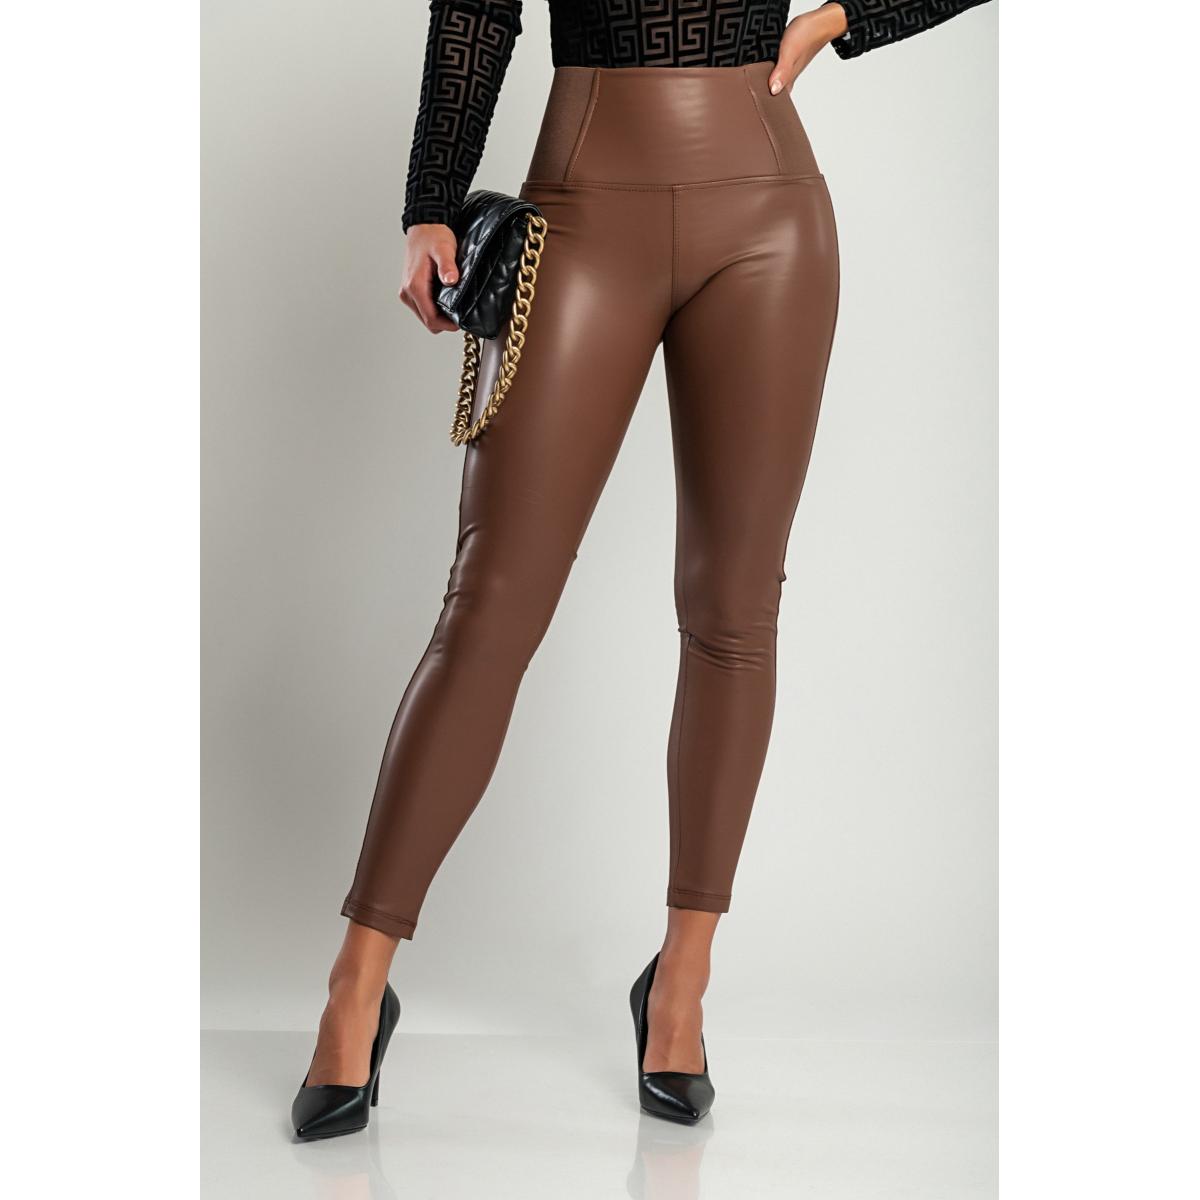 Fashion leggings in faux leather, brown --7%